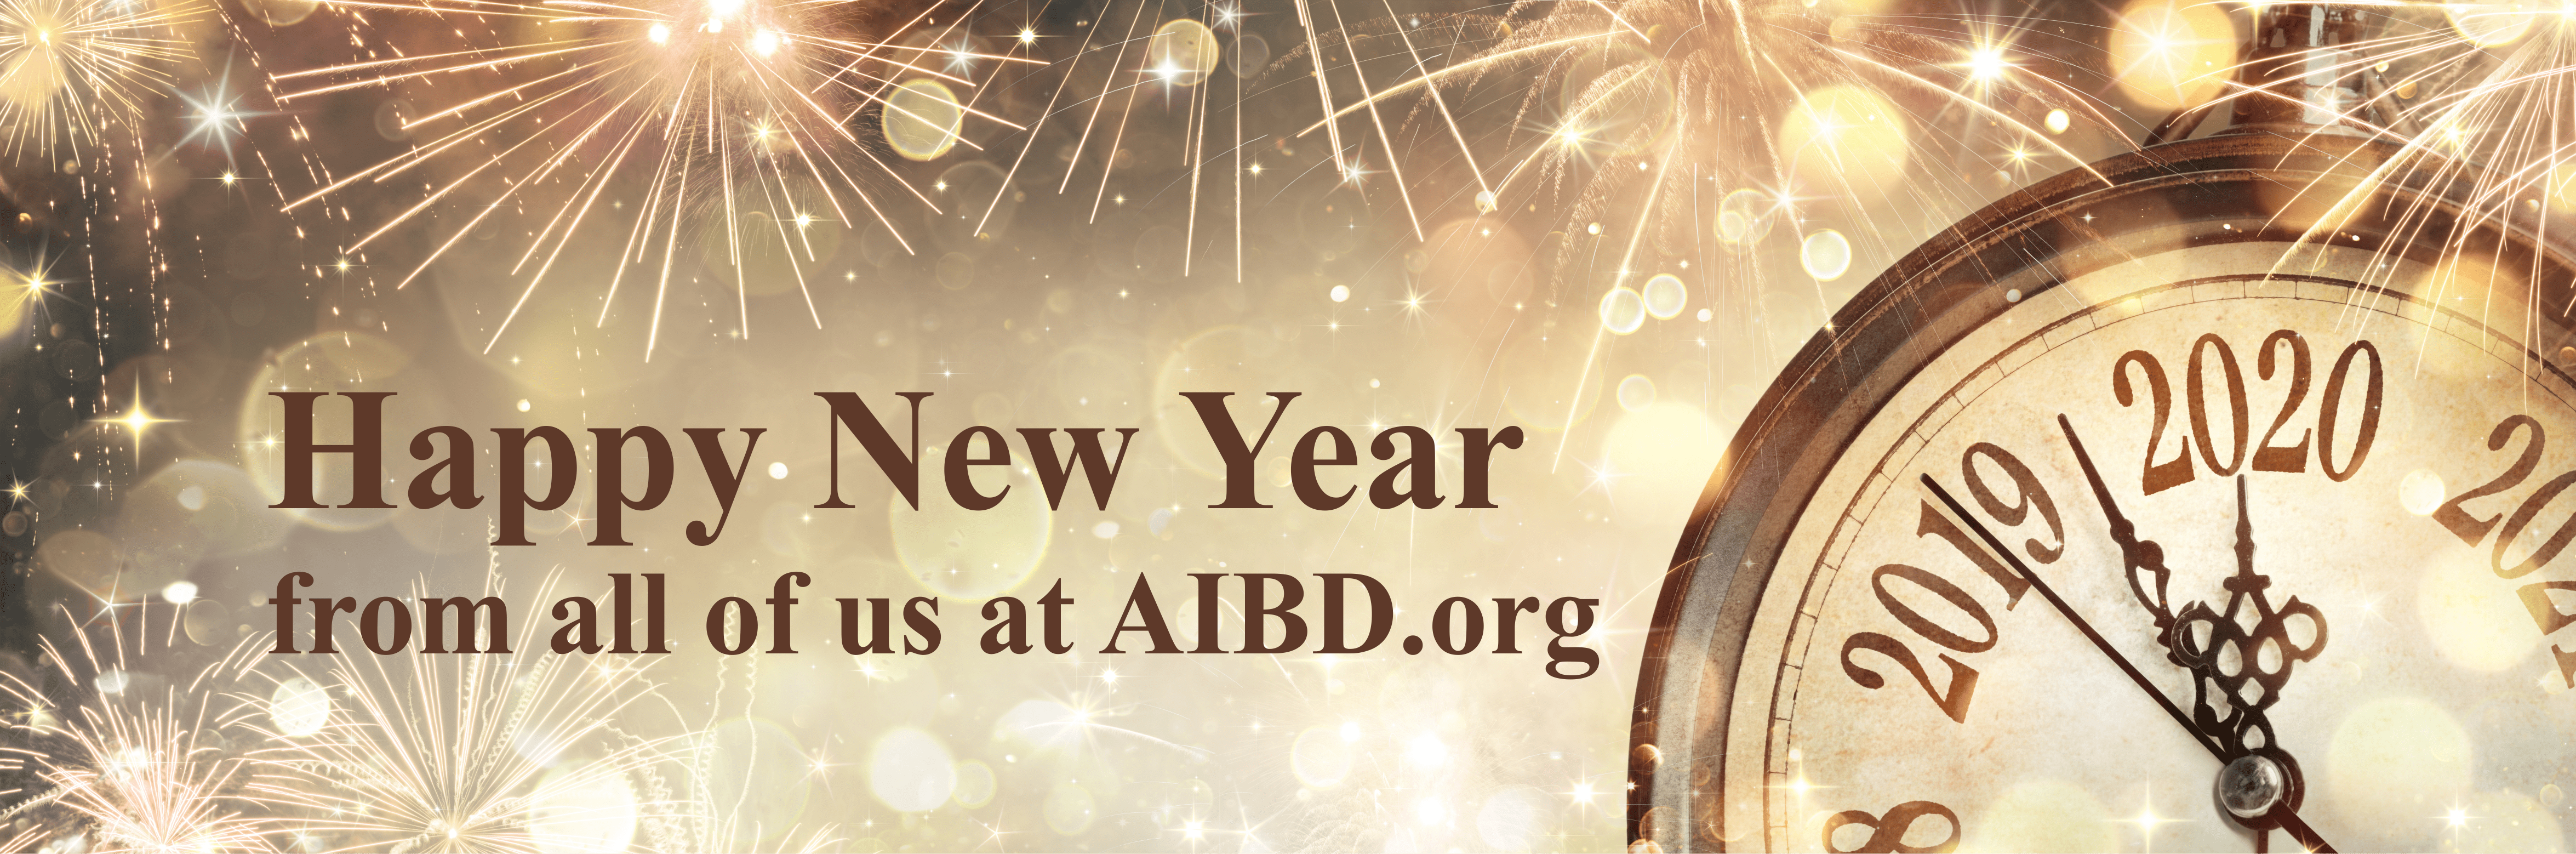 A clock set to the year 2020 and text that says Happy New Year from all of us at AIBD.org.